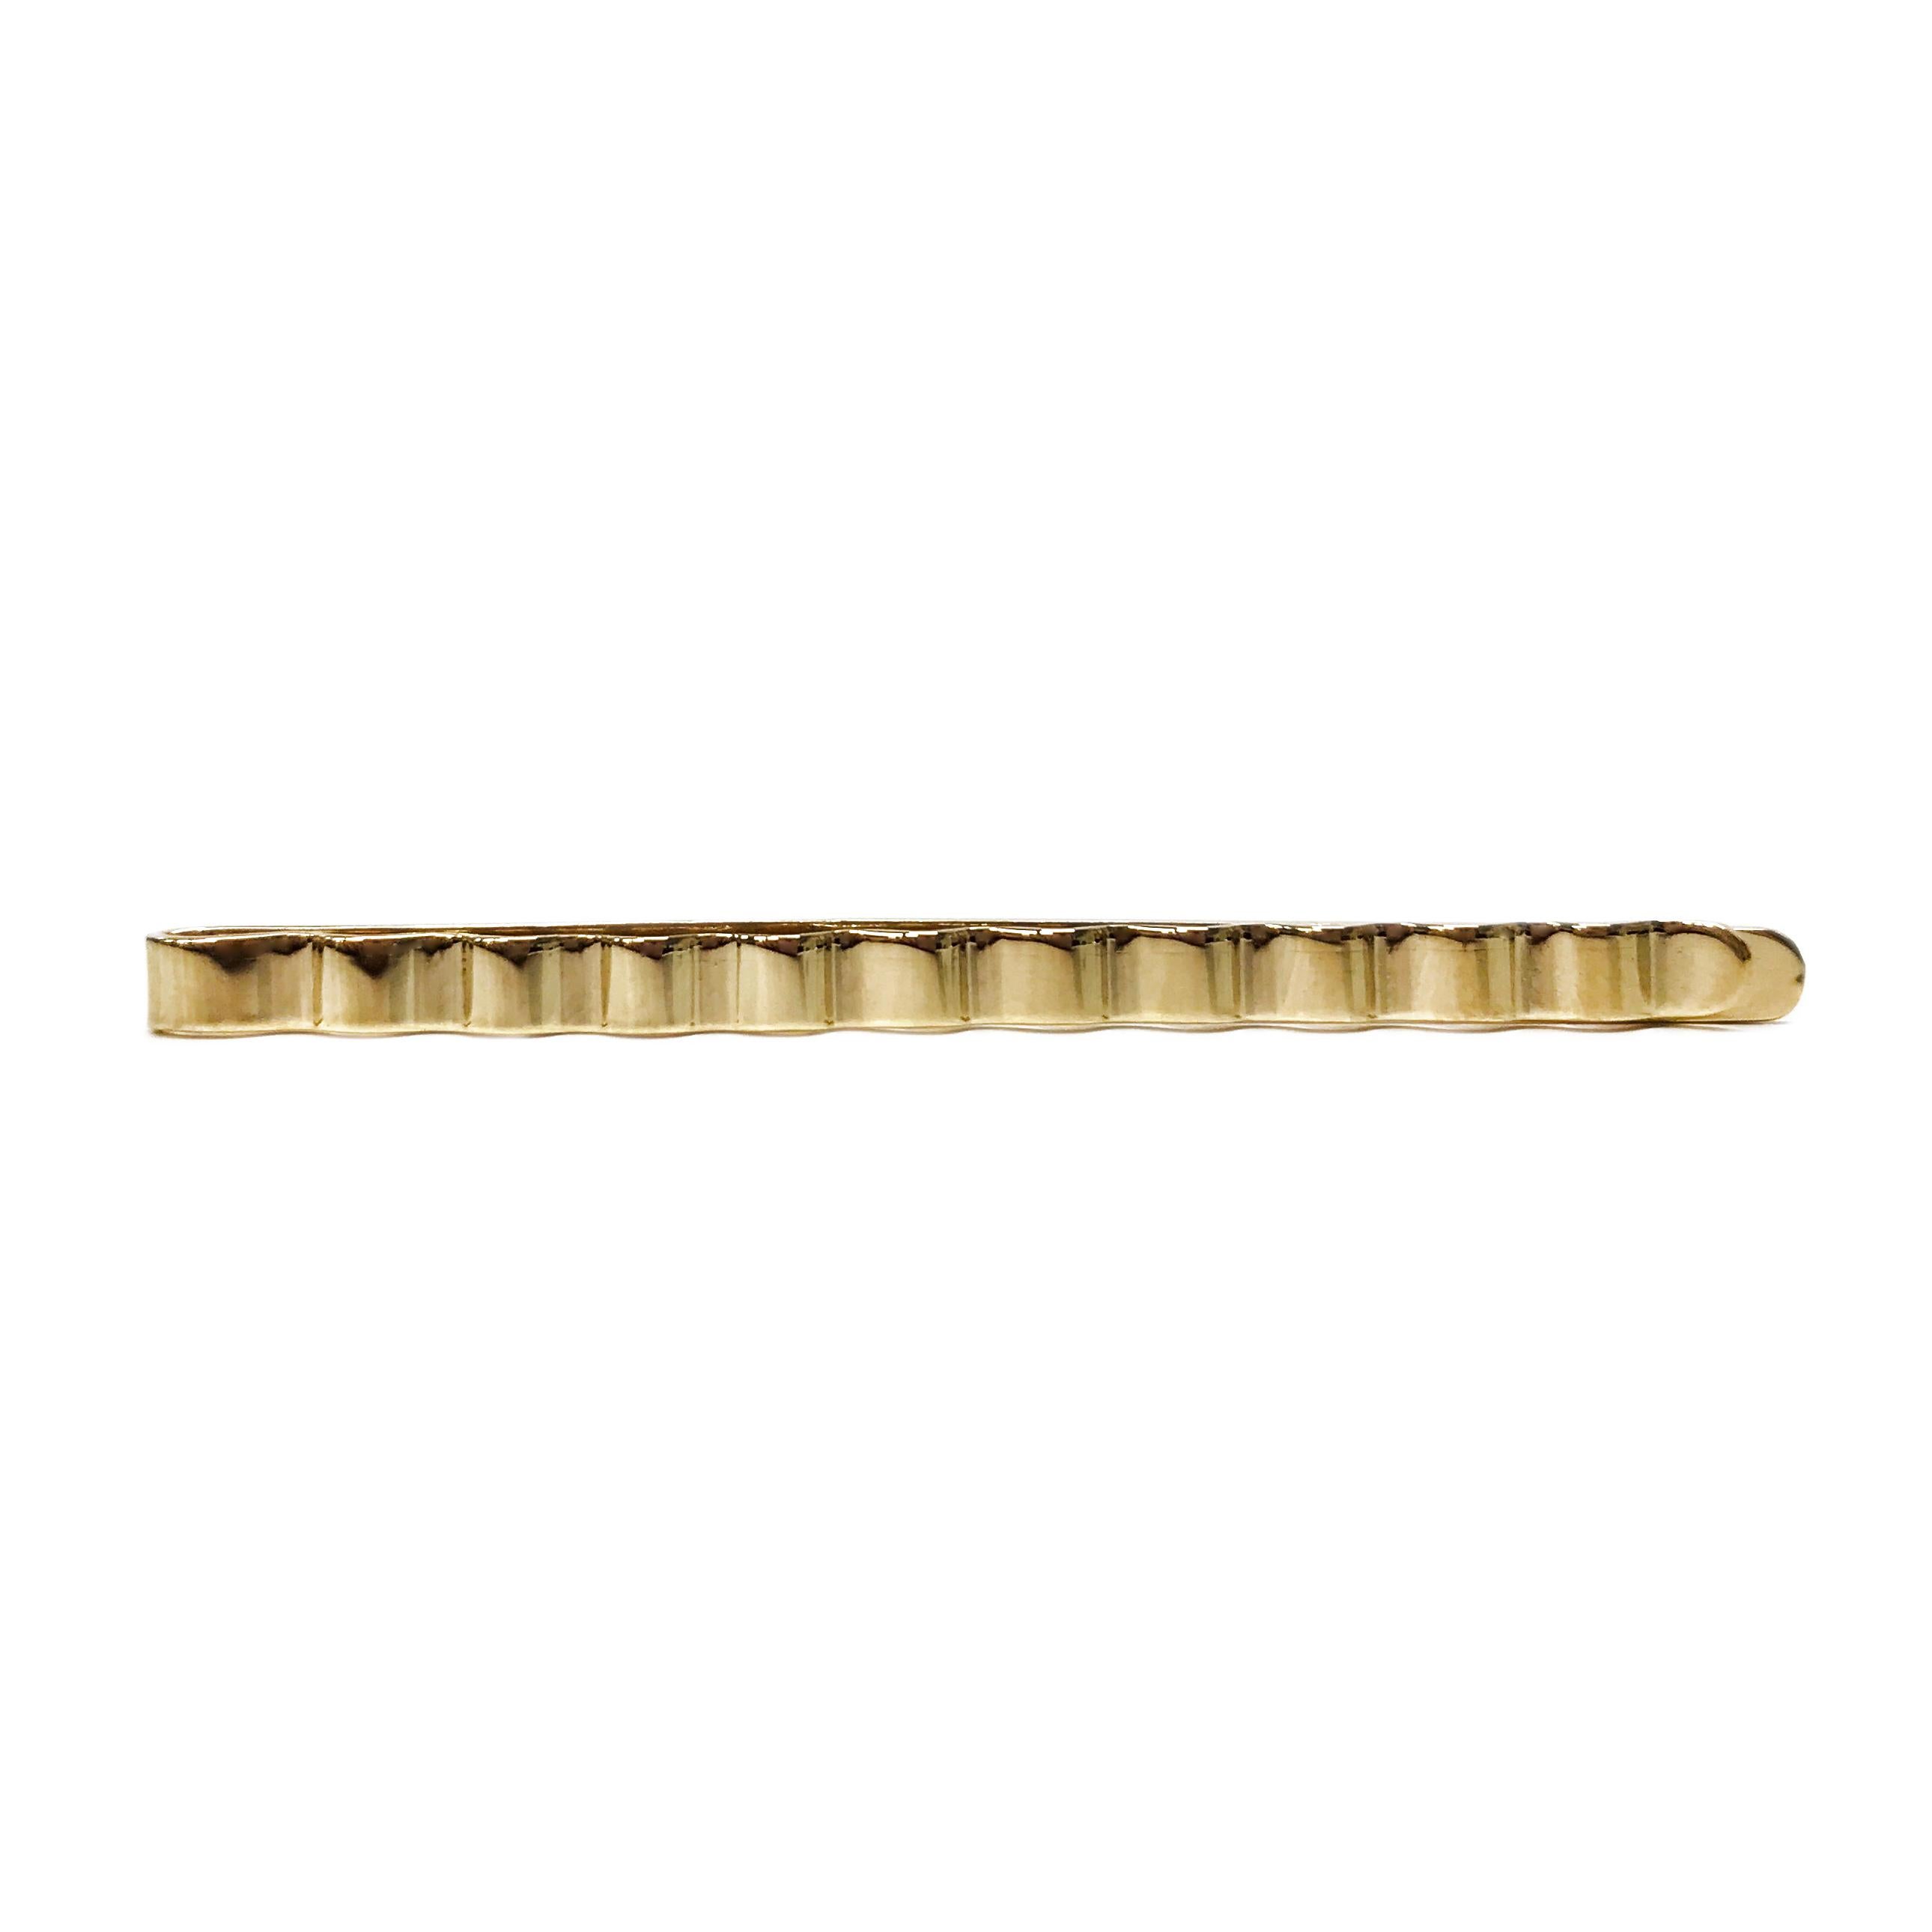 14 Karat Ridged Tie Bar. Simple design yet sophisticated piece that will add a nice detail to any tie. The top of the tie bar has a zig-zag design and the entire tie bar has a smooth shiny. Stamped on the back is 14K. The total weight of the tie